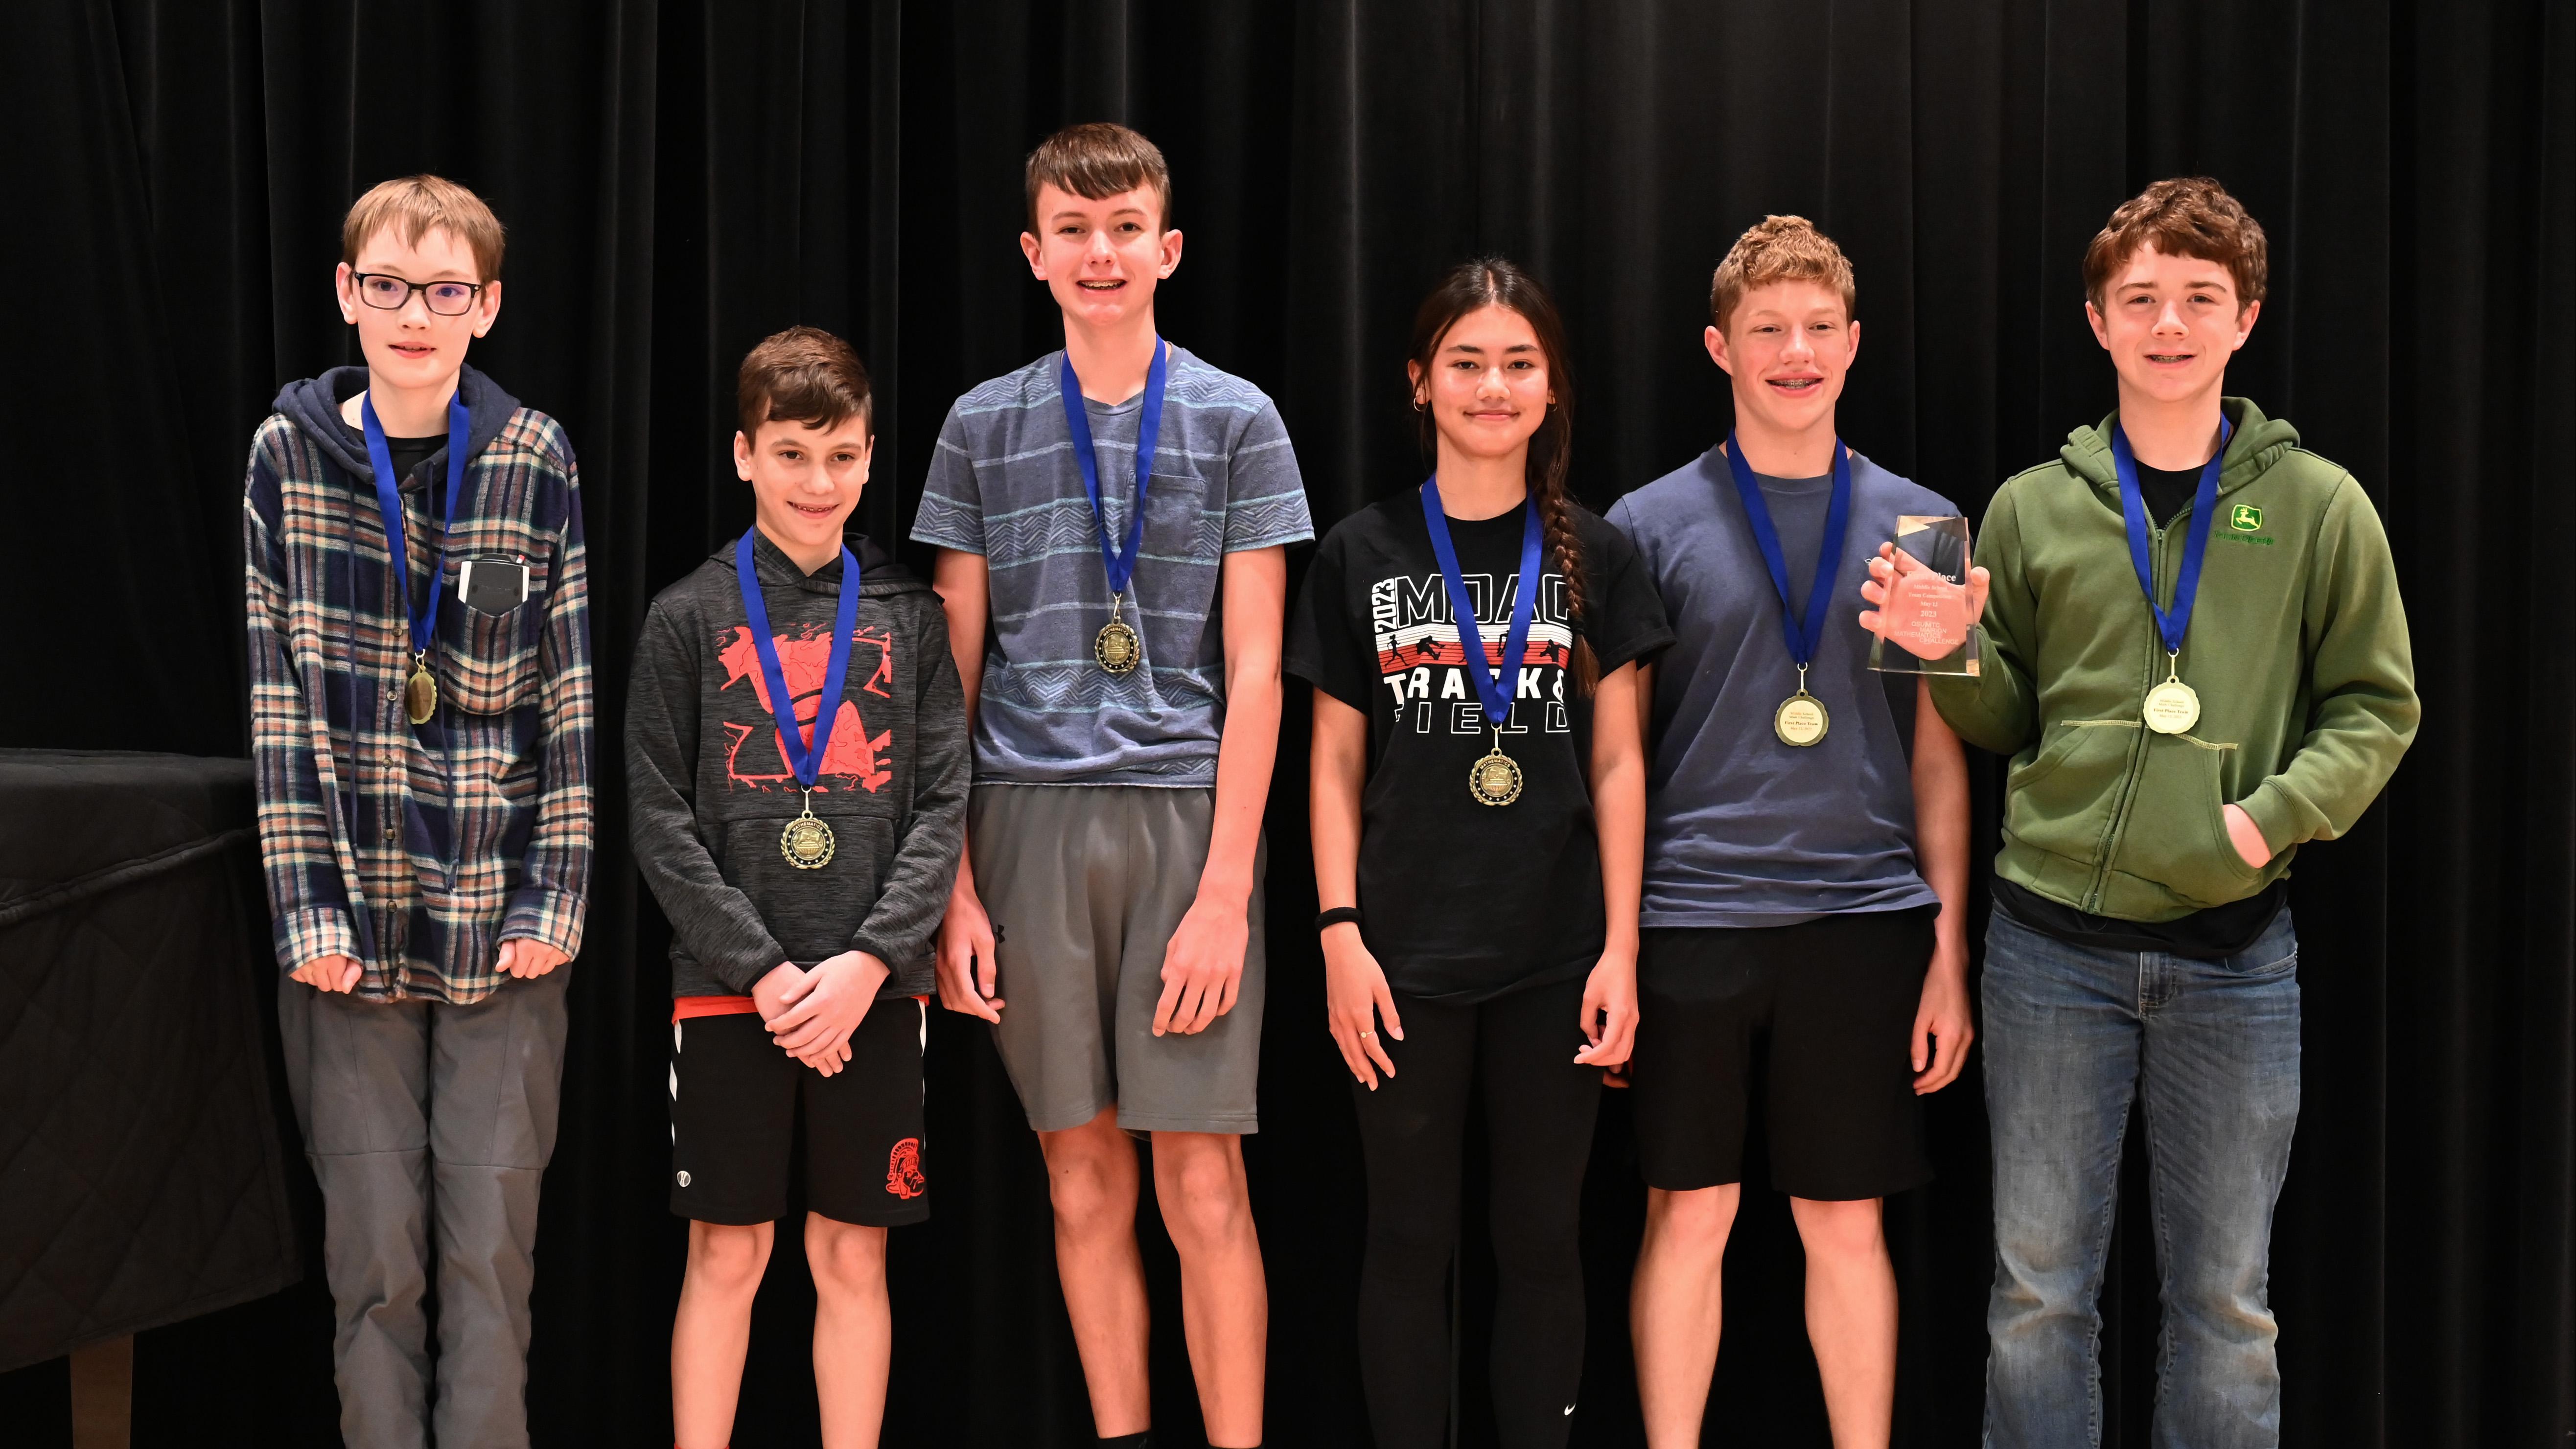 Six middle school students pose with award